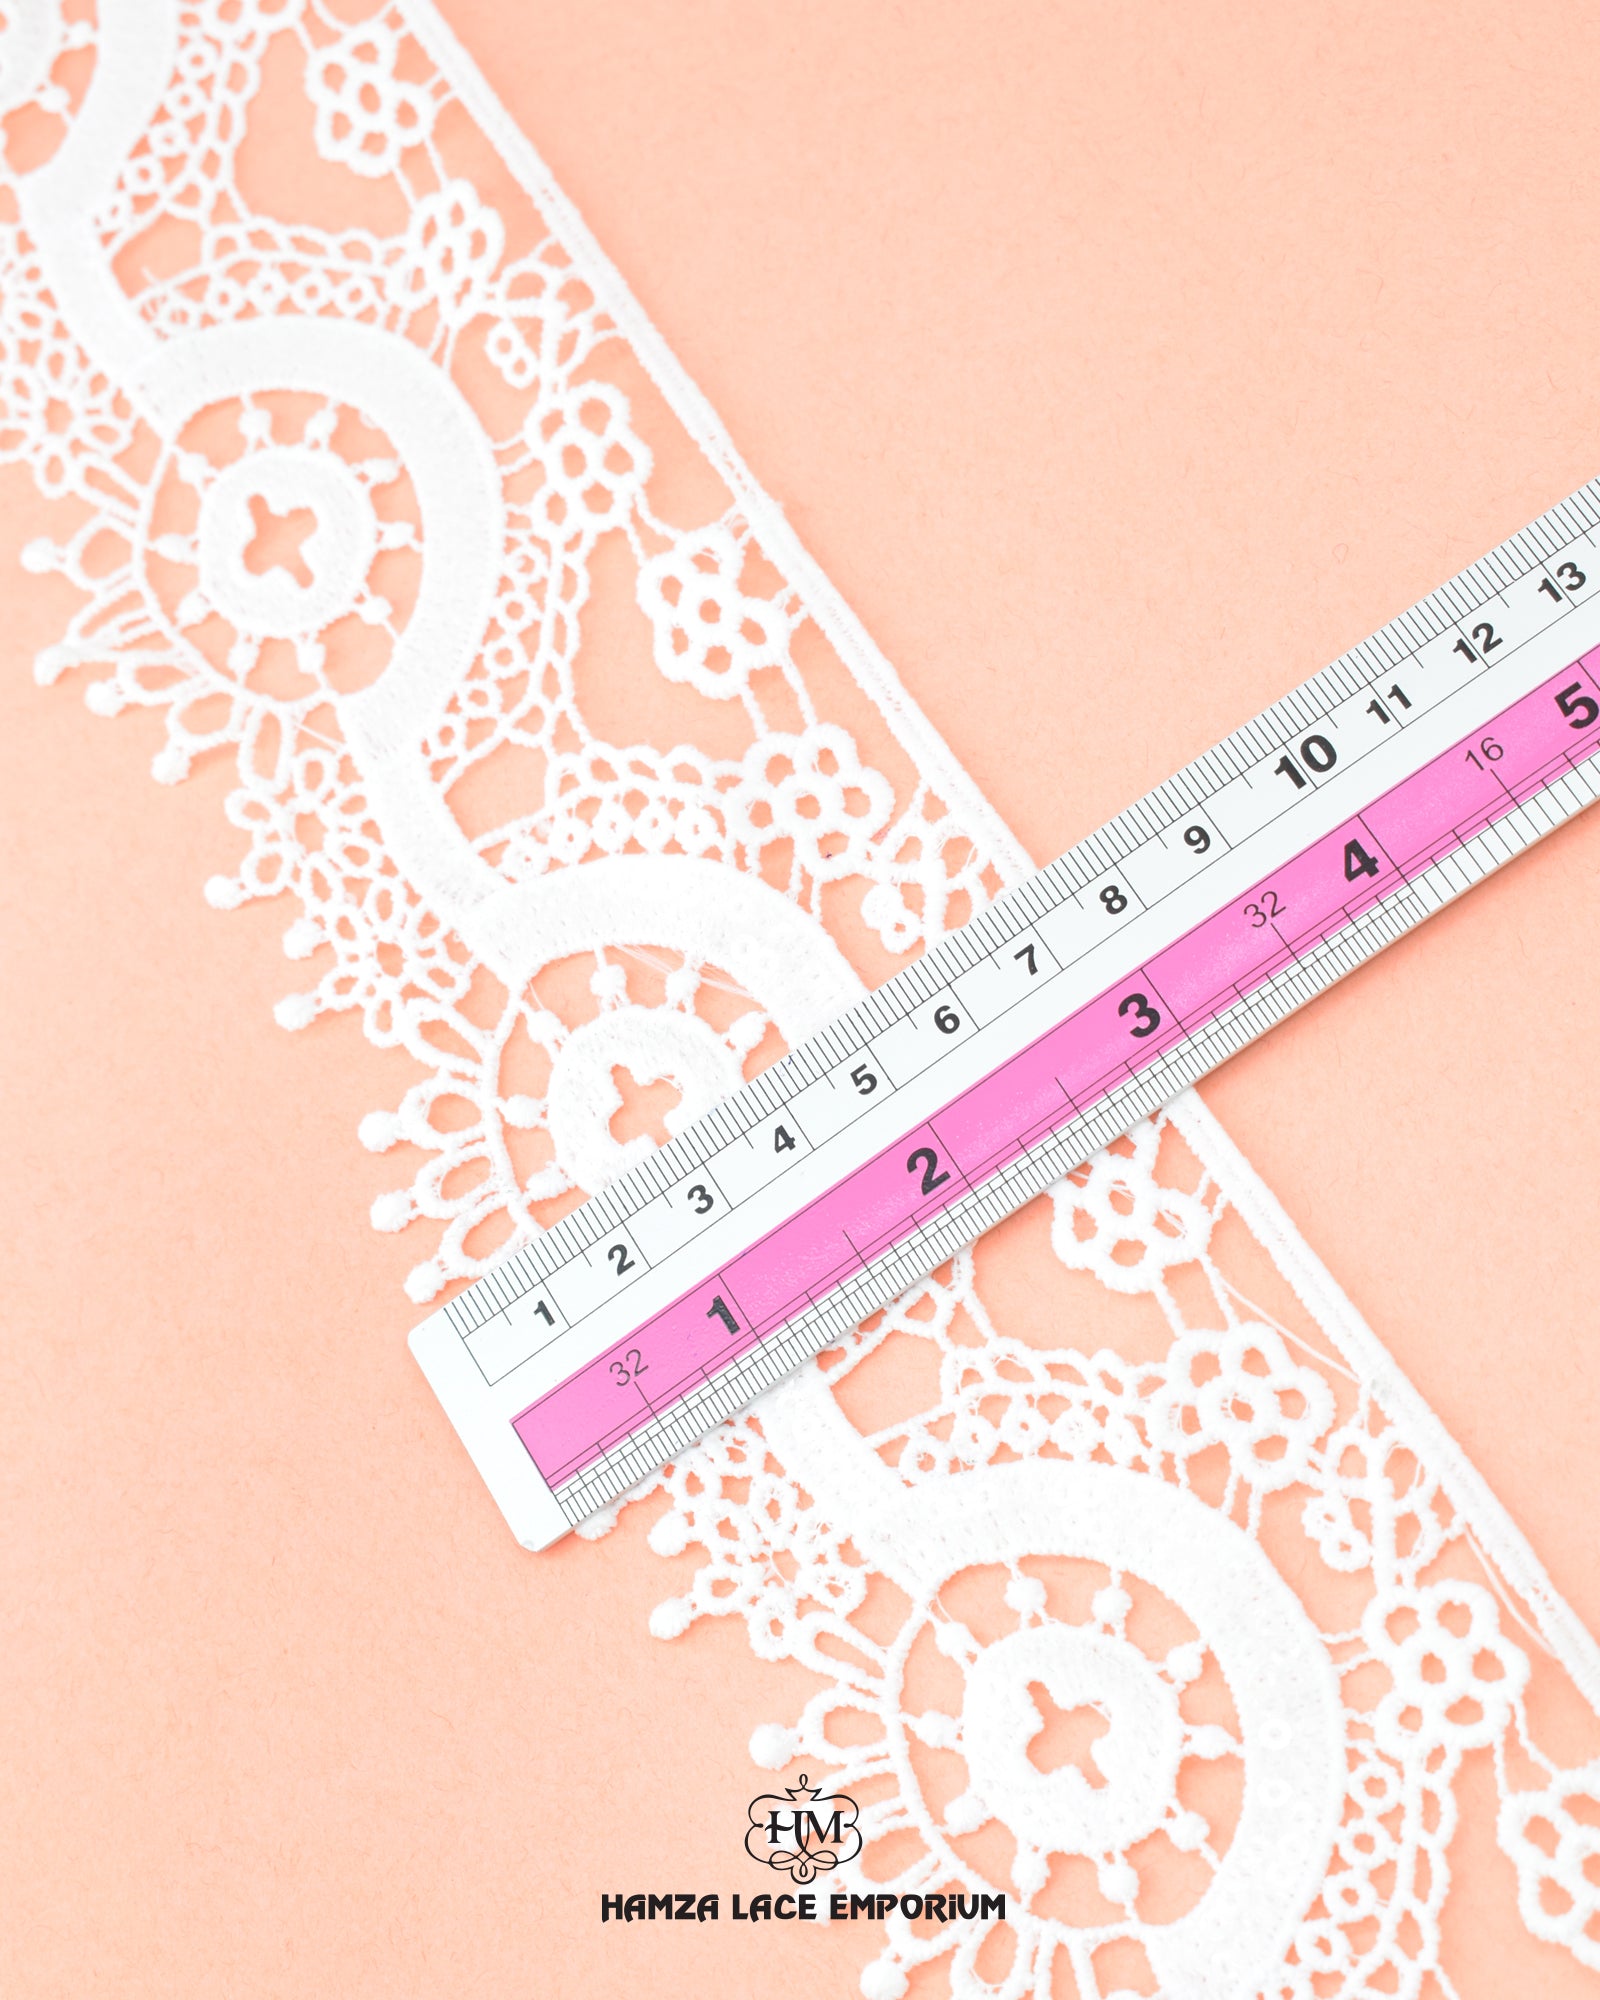 Size of the 'Edging Lace 23055' is shown as '3' inches with the help of a ruler